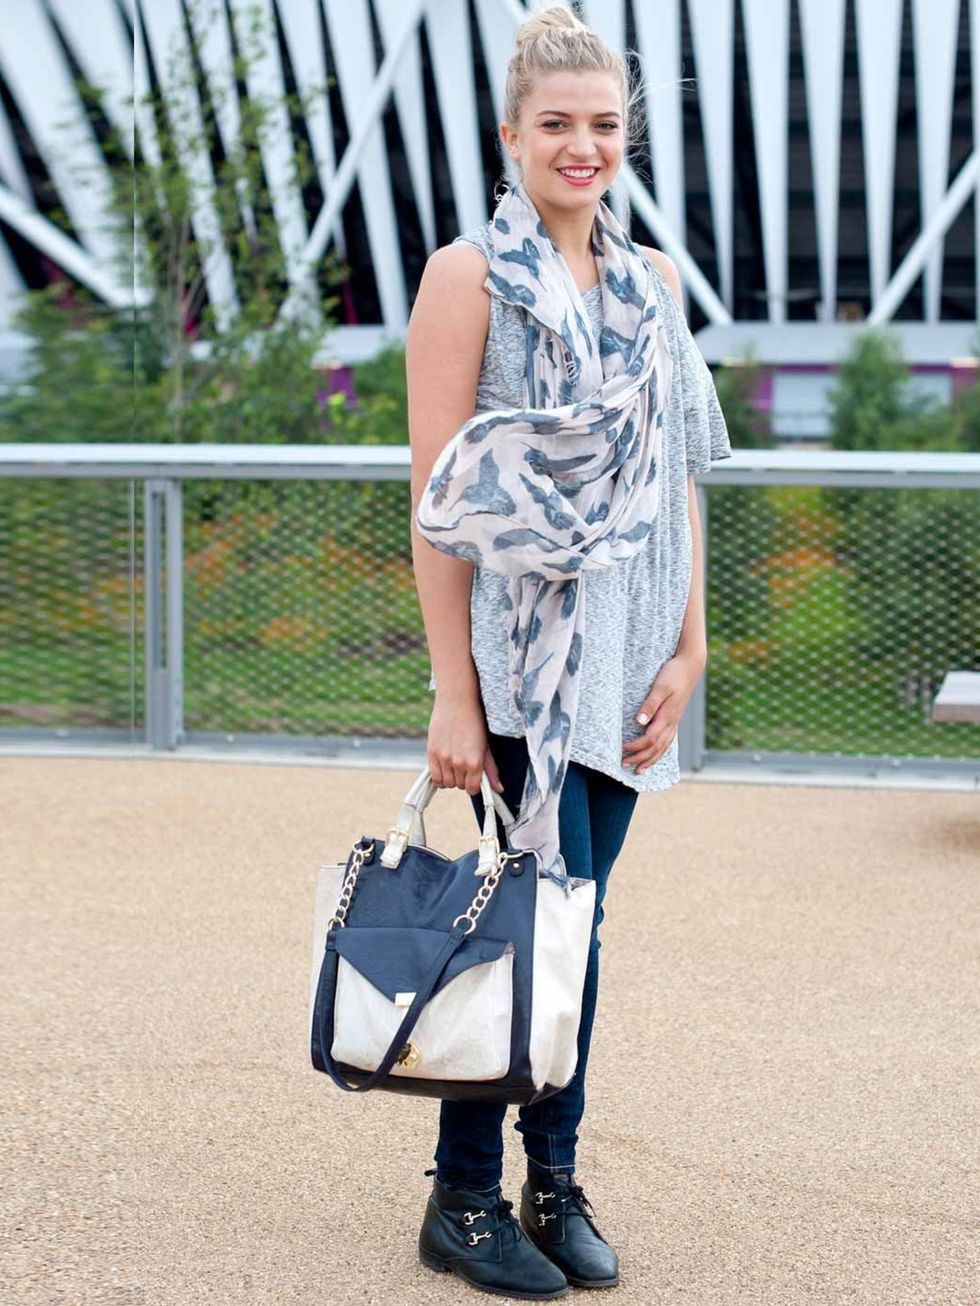 <p>Grace Jabbari, 19, Dance Student.Topshop top and bag, Hollister jeans, vintage shoes and scarf.</p>